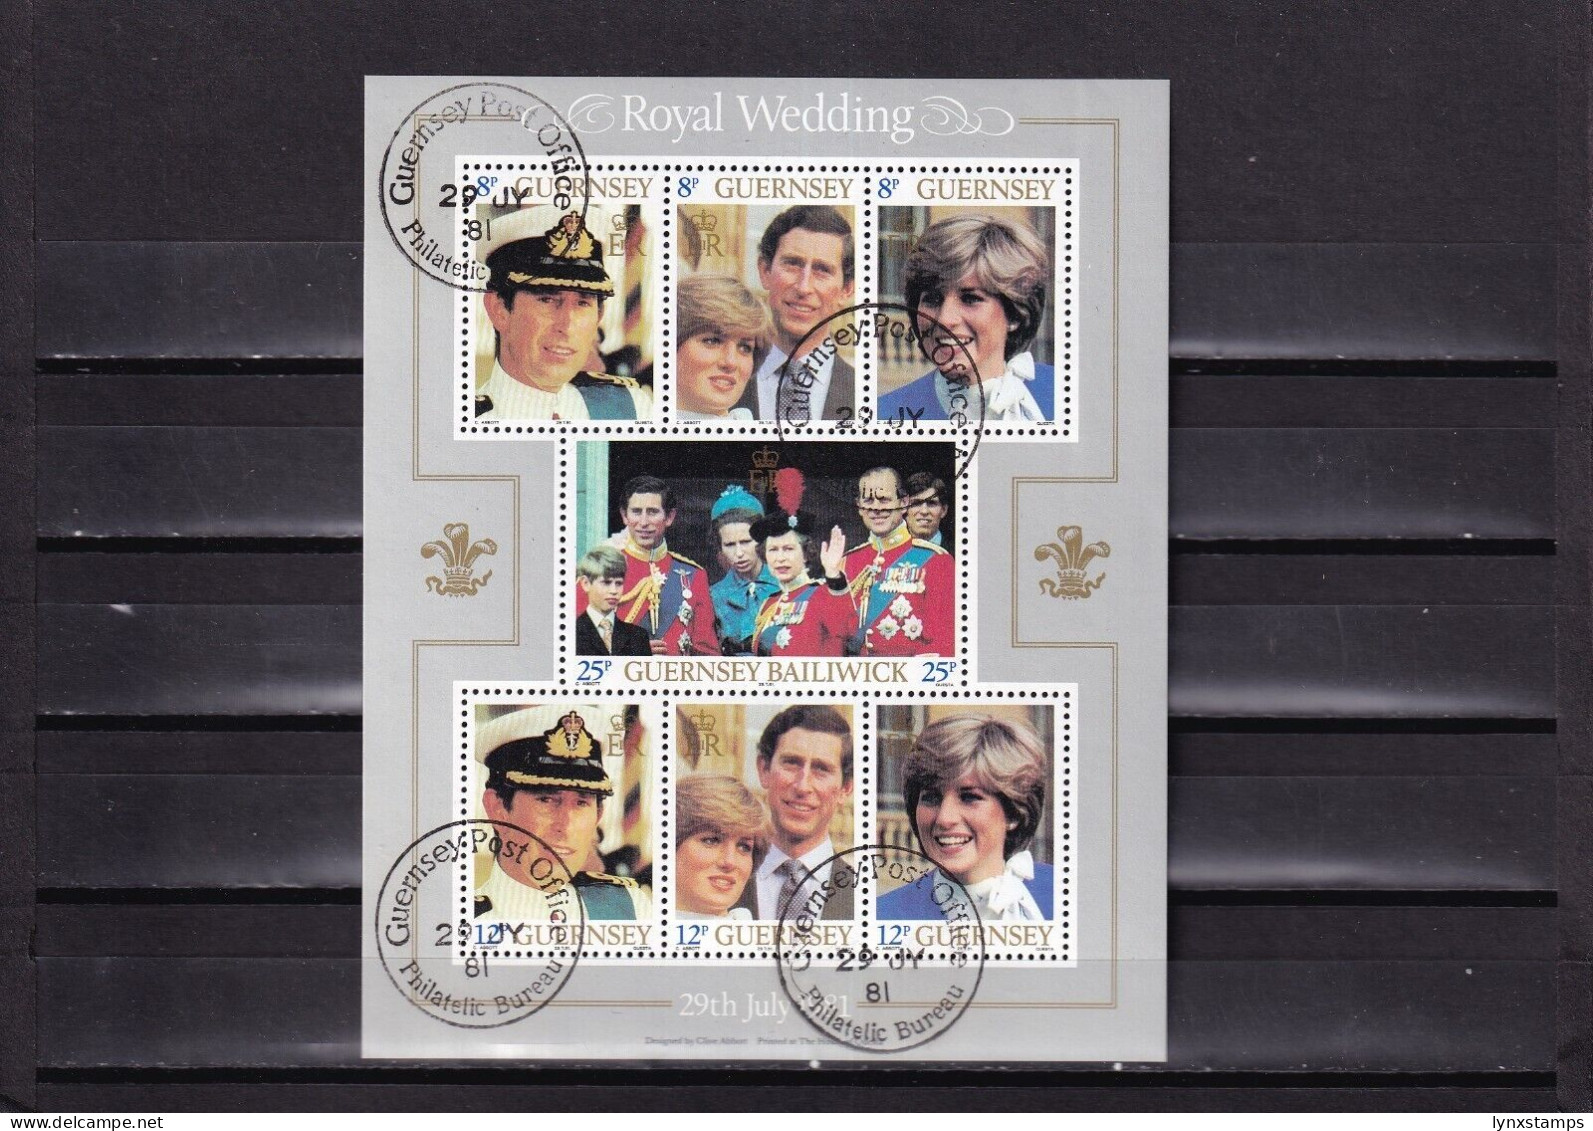 ER04 Guernsey 1981 Royal Wedding Used Souvenir Sheet - Local Issues